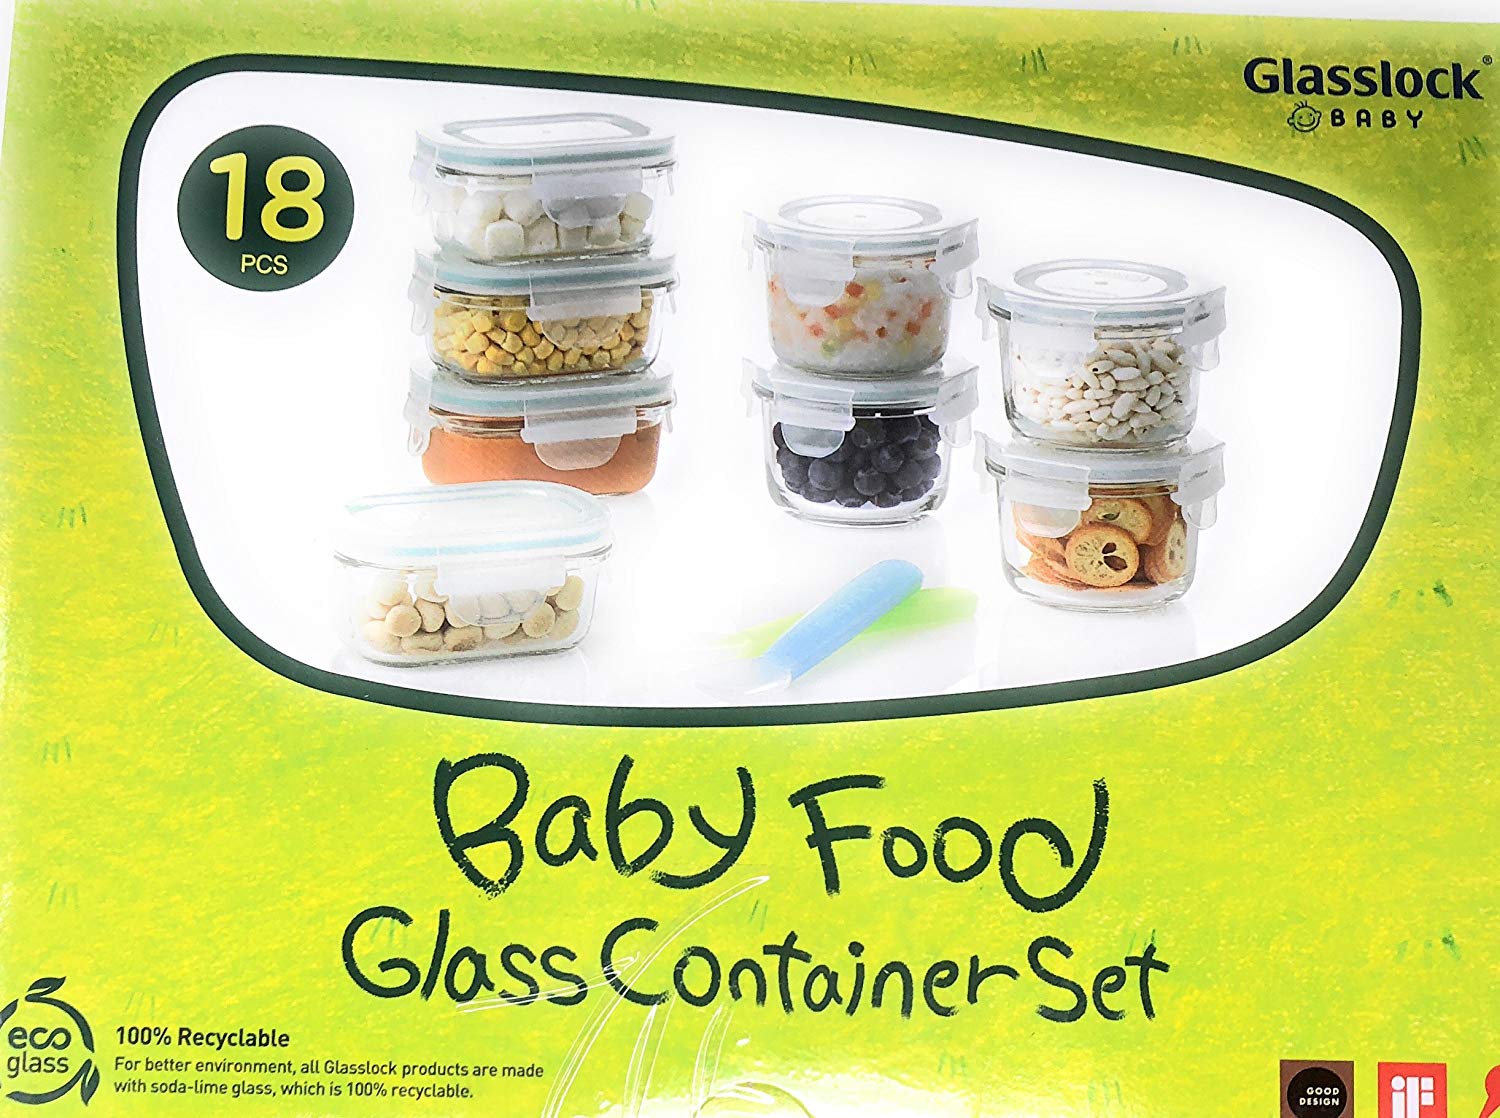 Glasslock Baby Food Glass Container Set 18